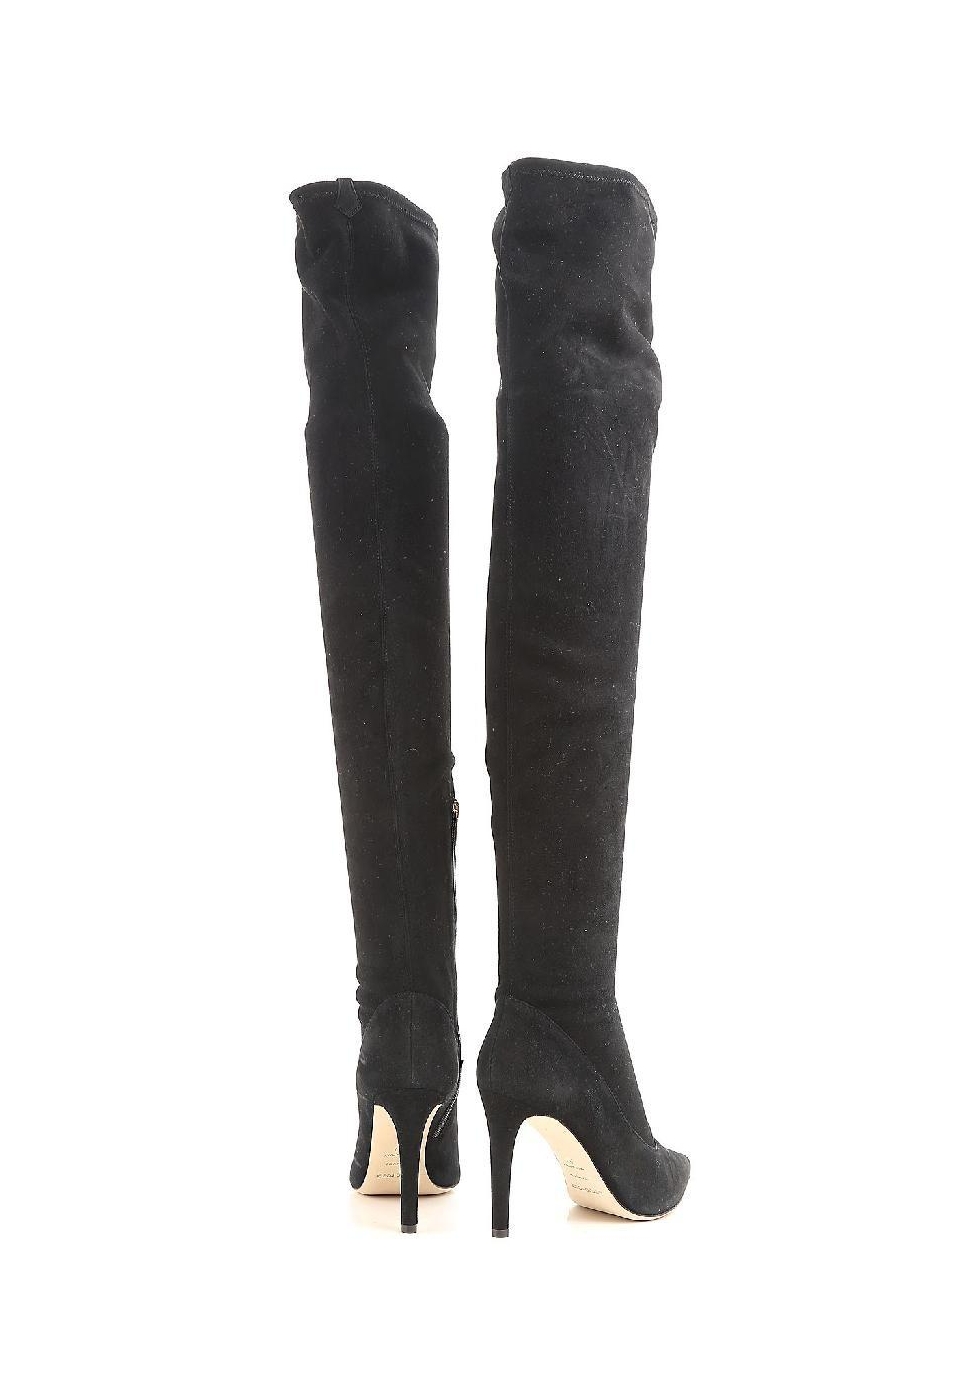 Sergio Rossi woman's over the knee boots in black suede with stilettos ...